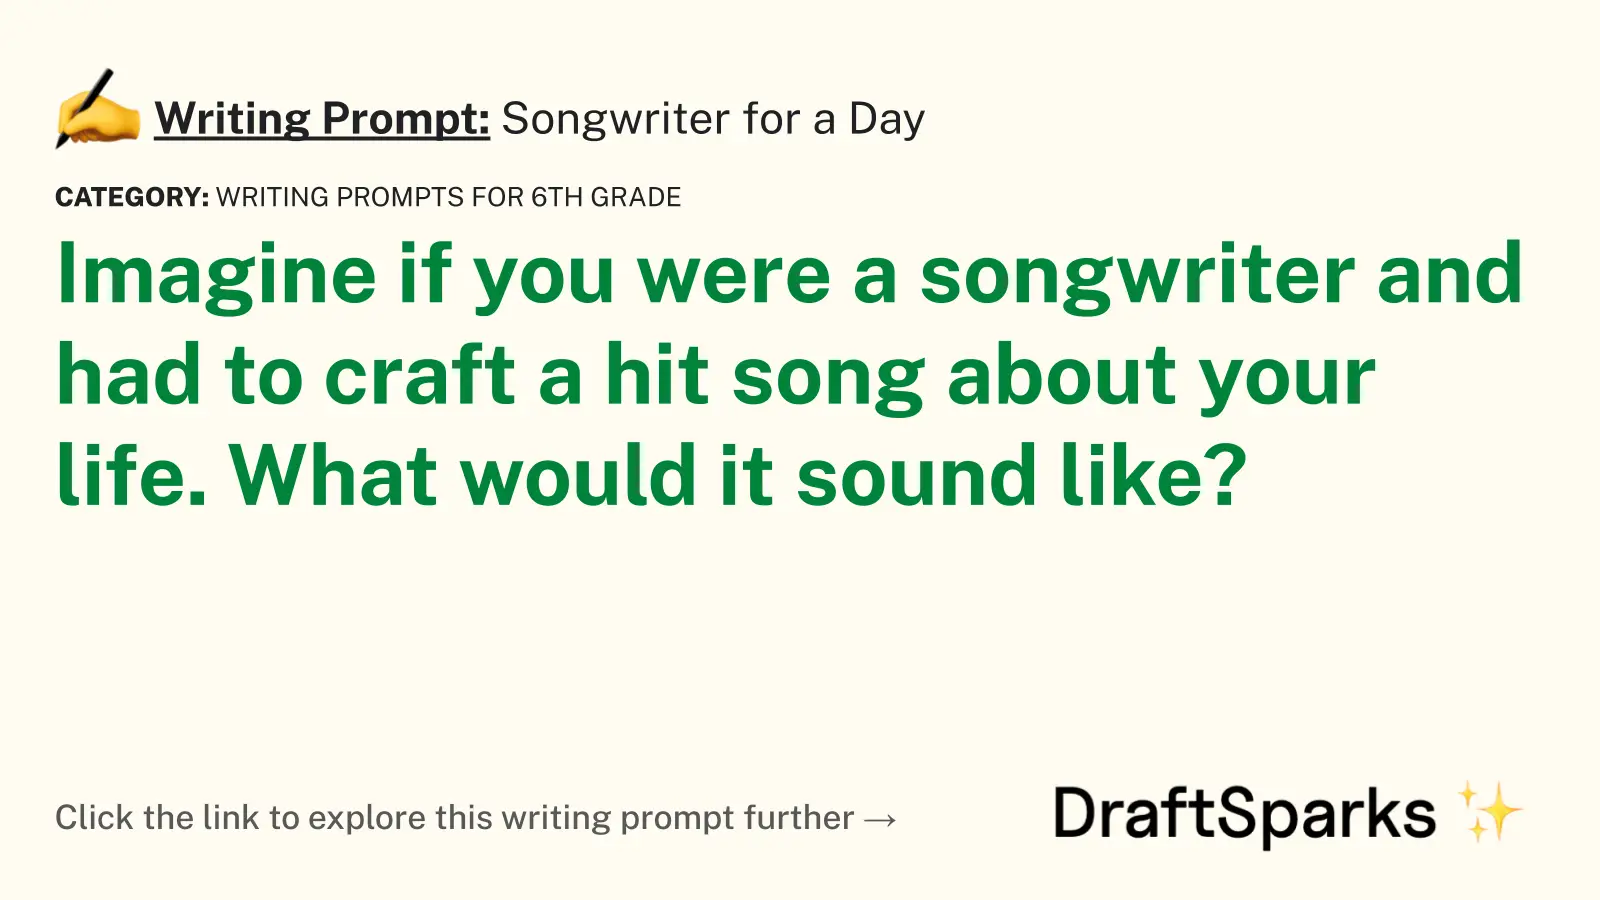 Songwriter for a Day